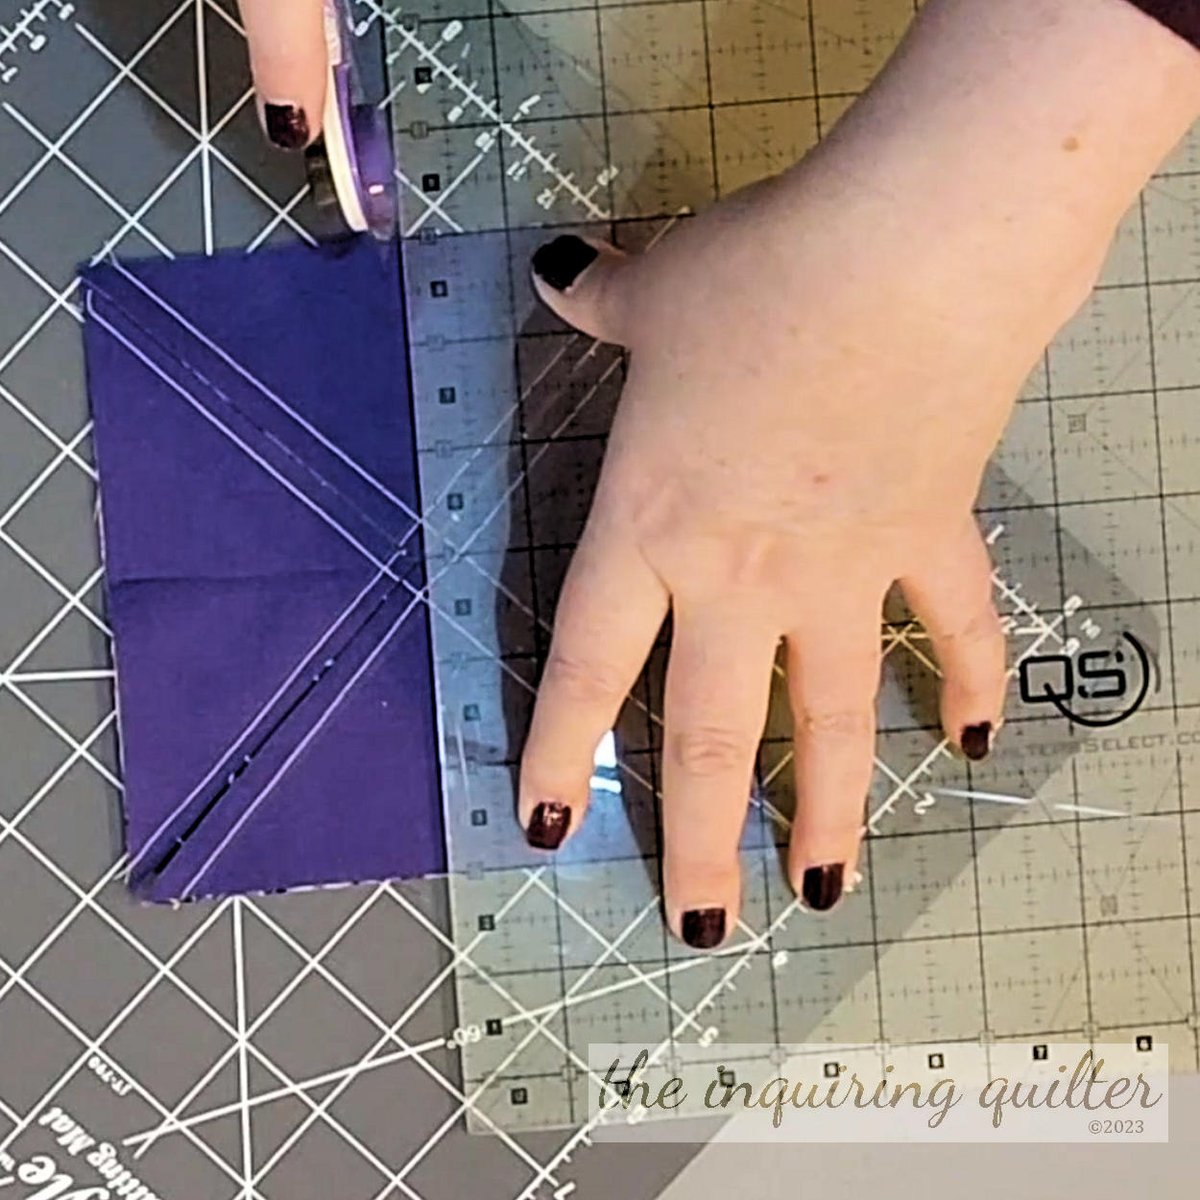 I love making HSTs eight at a time! Check out my YouTube channel for more. #inquiringquilter #intelligentquilting #youtubevideo #youtubetutorial #quiltingtutorial #quiltingtutorial #beginnerquilt #halfsquaretriangles #hstquilt #quiltingtools